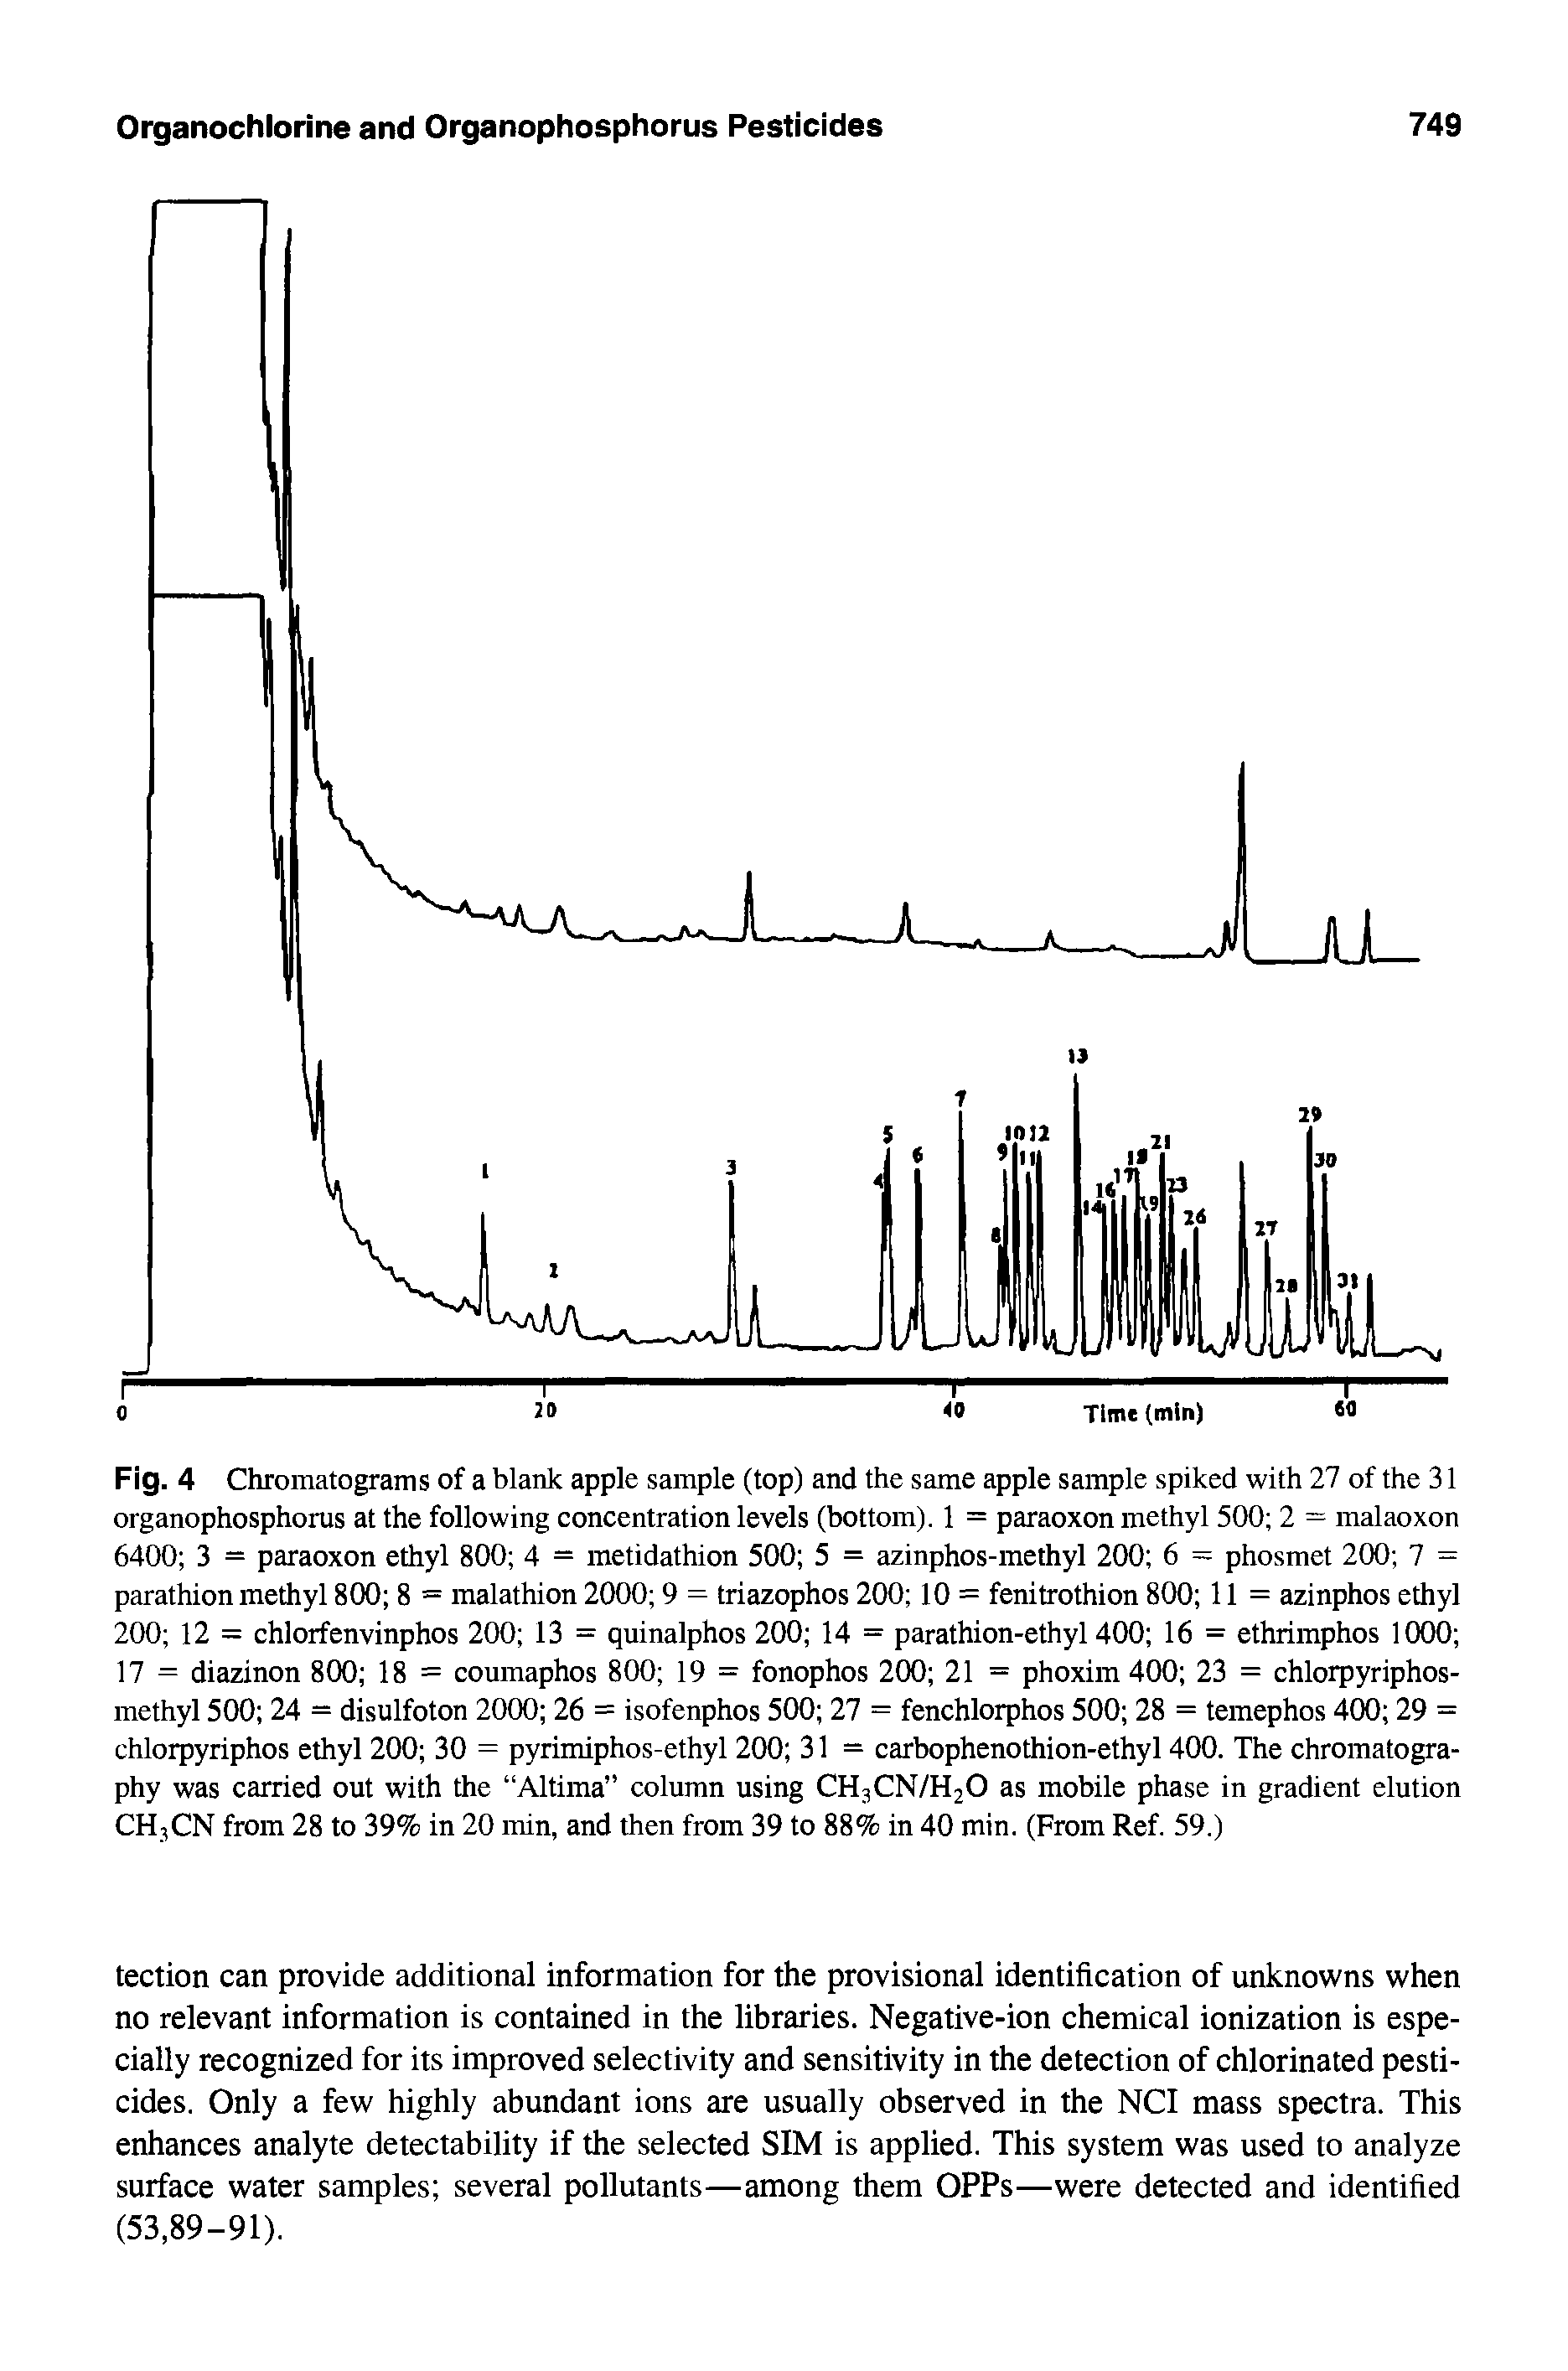 Fig. 4 Chromatograms of a blank apple sample (top) and the same apple sample spiked with 27 of the 31 organophosphorus at the following concentration levels (bottom). 1 = paraoxon methyl 500 2 = malaoxon 6400 3 = paraoxon ethyl 800 4 = metidathion 500 5 = azinphos-methyl 200 6 = phosmet 200 7 = parathion methyl 800 8 = malathion 2000 9 = triazophos 200 10 = fenitrothion 800 11= azinphos ethyl 200 12 = chlorfenvinphos 200 13 = quinalphos 200 14 = parathion-ethyl 400 16 = ethrimphos 1000 17 = diazinon 800 18 = coumaphos 800 19 = fonophos 200 21 = phoxim 400 23 = chlorpyriphos-methyl 500 24 = disulfoton 2000 26 = isofenphos 500 27 = fenchlorphos 500 28 = temephos 400 29 = chlorpyriphos ethyl 200 30 = pyrimiphos-ethyl 200 31 = carbophenothion-ethyl 400. The chromatography was carried out with the Altima column using CH3CN/H20 as mobile phase in gradient elution CHjCN from 28 to 39% in 20 min, and then from 39 to 88% in 40 min. (From Ref. 59.)...